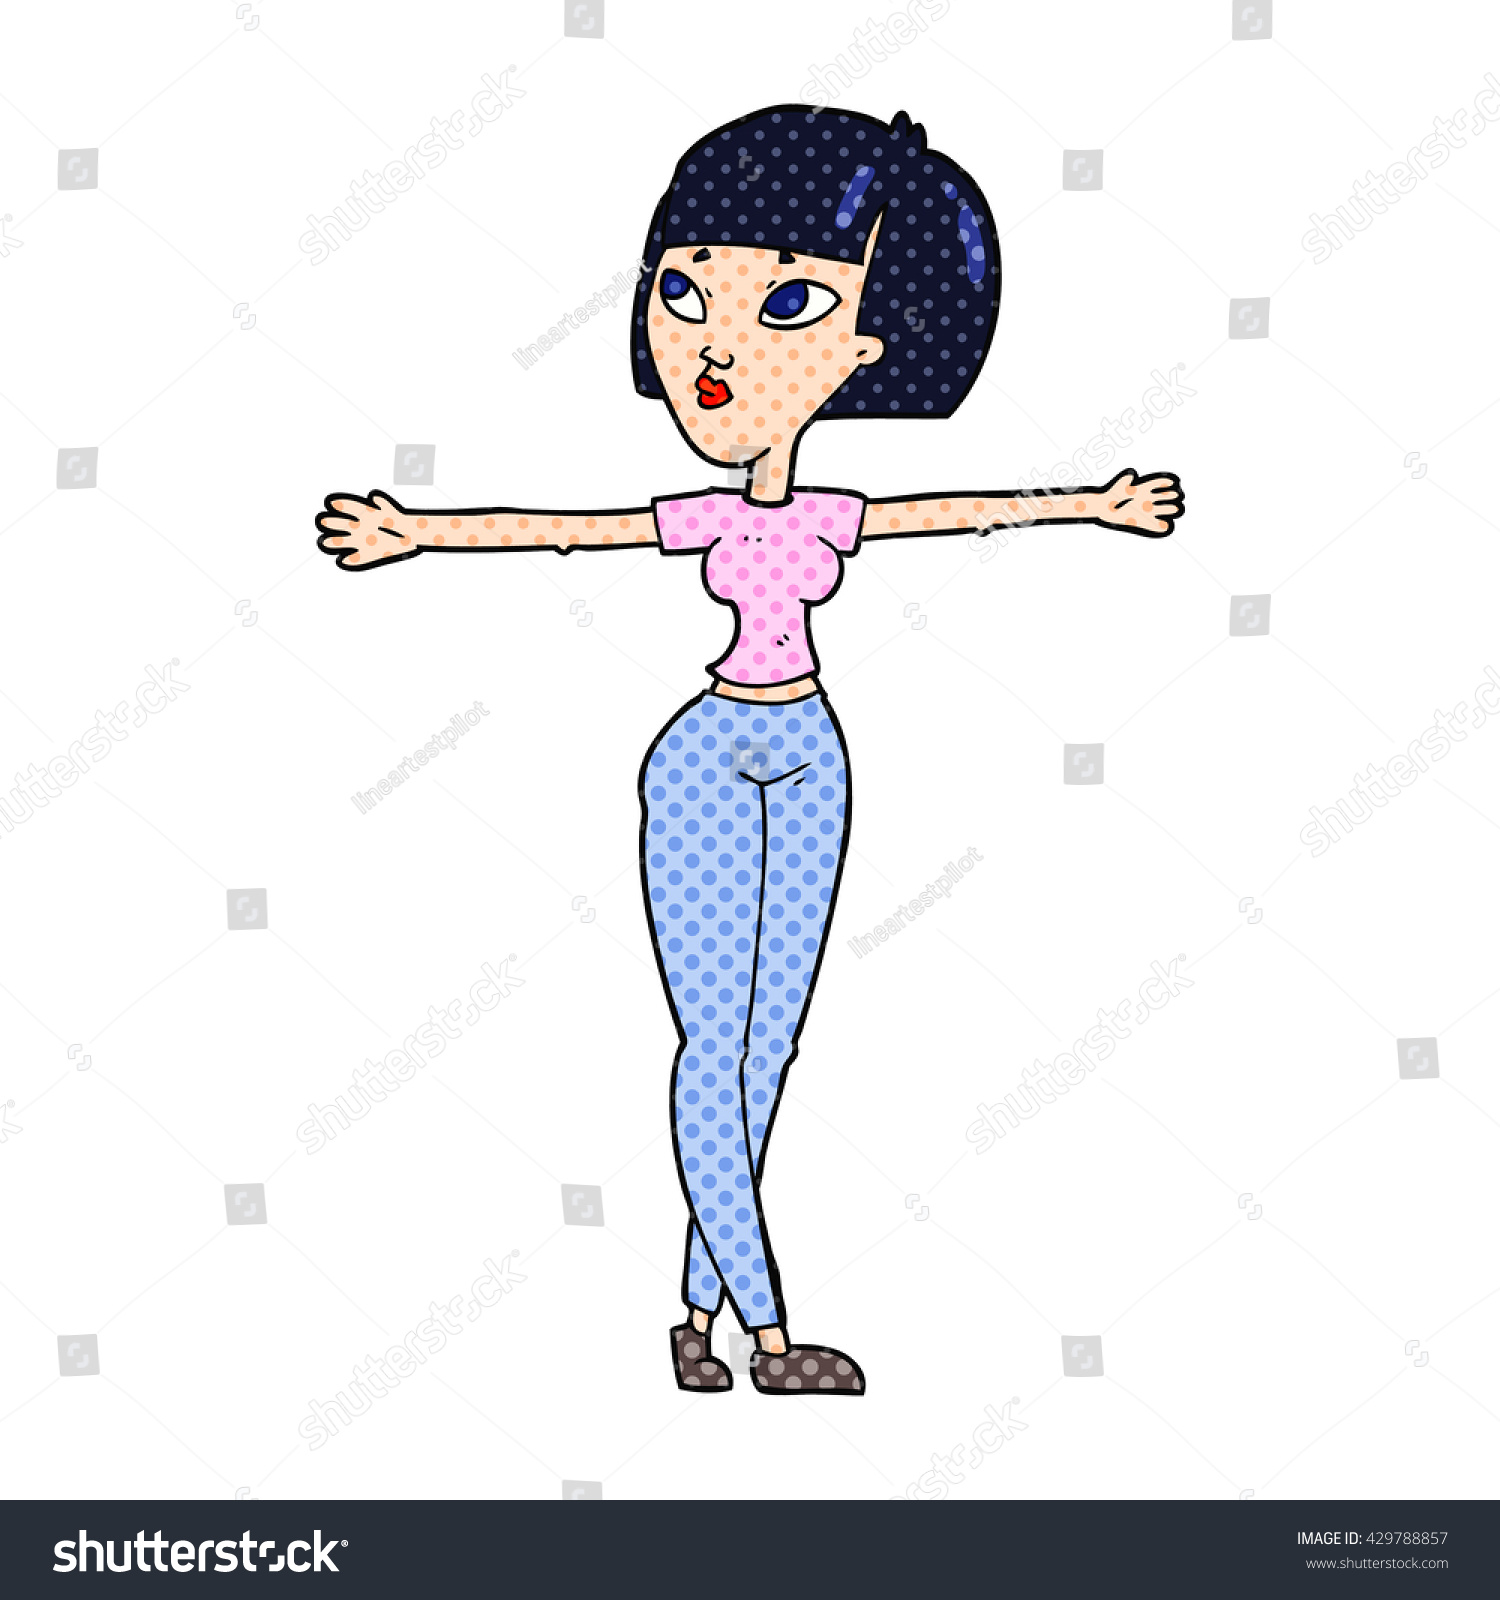 Freehand Drawn Cartoon Woman Spreading Arms Stock Vector Royalty Free 429788857 Shutterstock